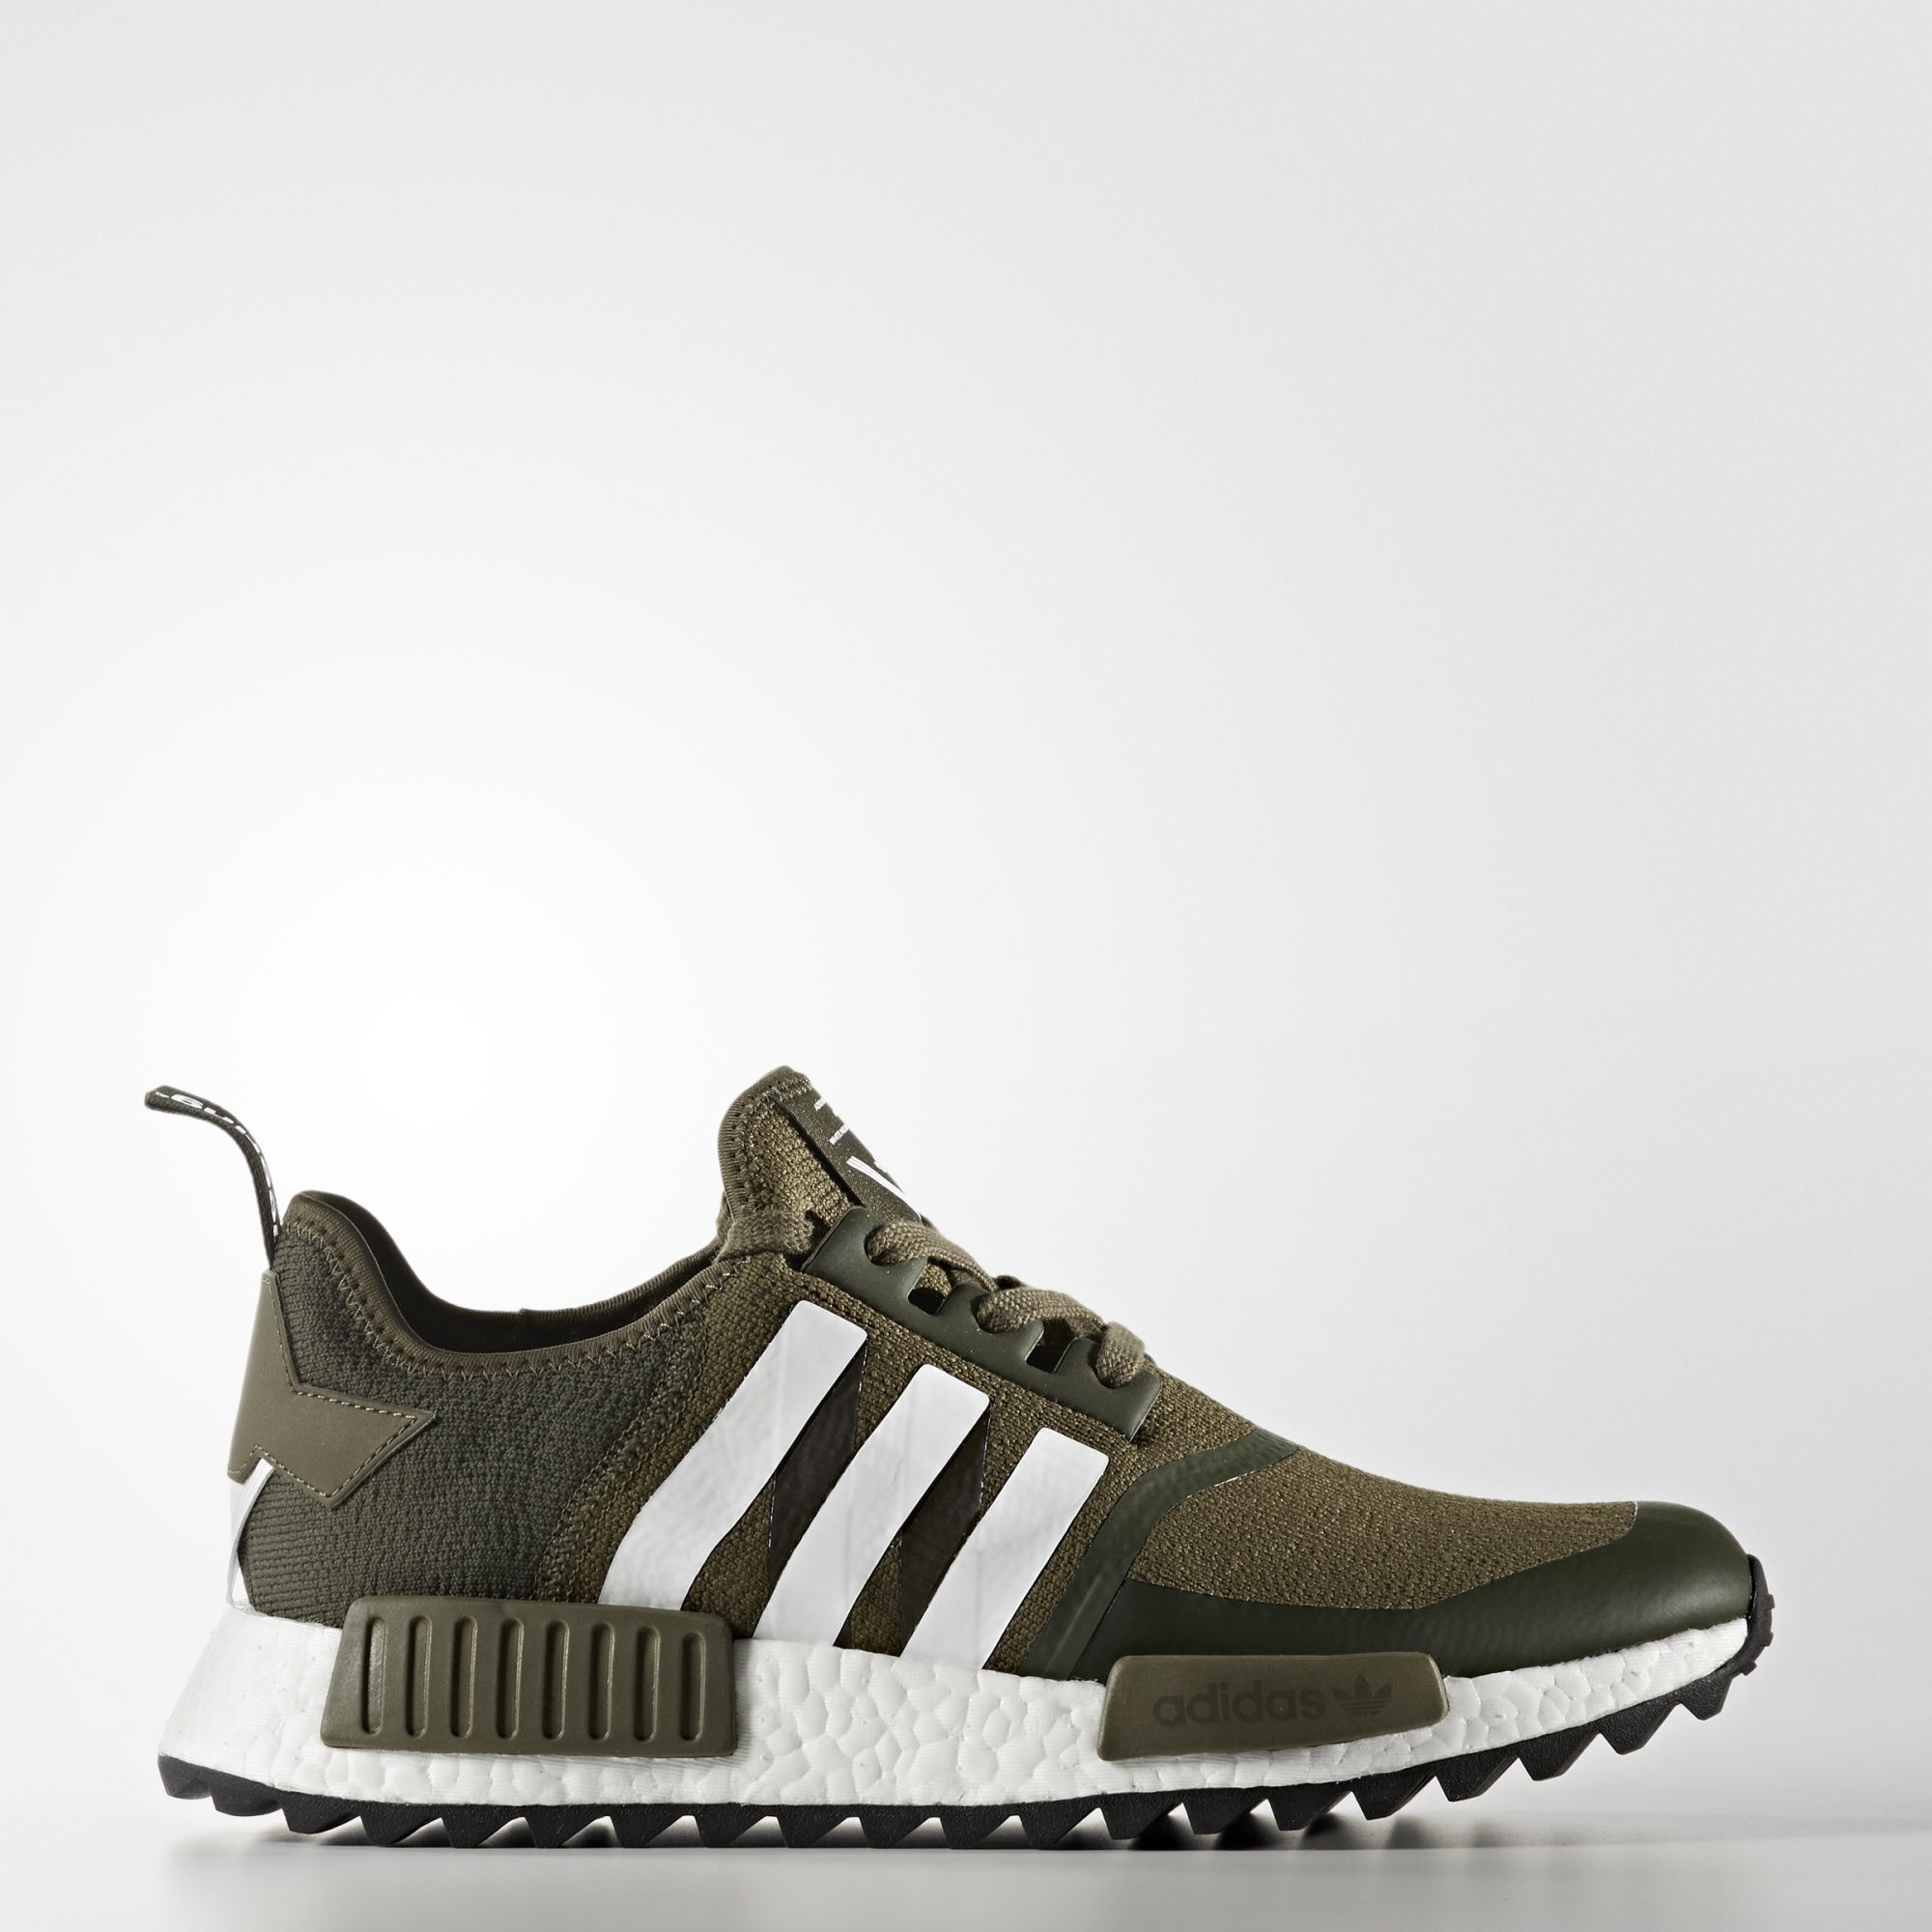 adidas-nmd_r1-trail-pk-x-white-mountaineering-trace-olive-2